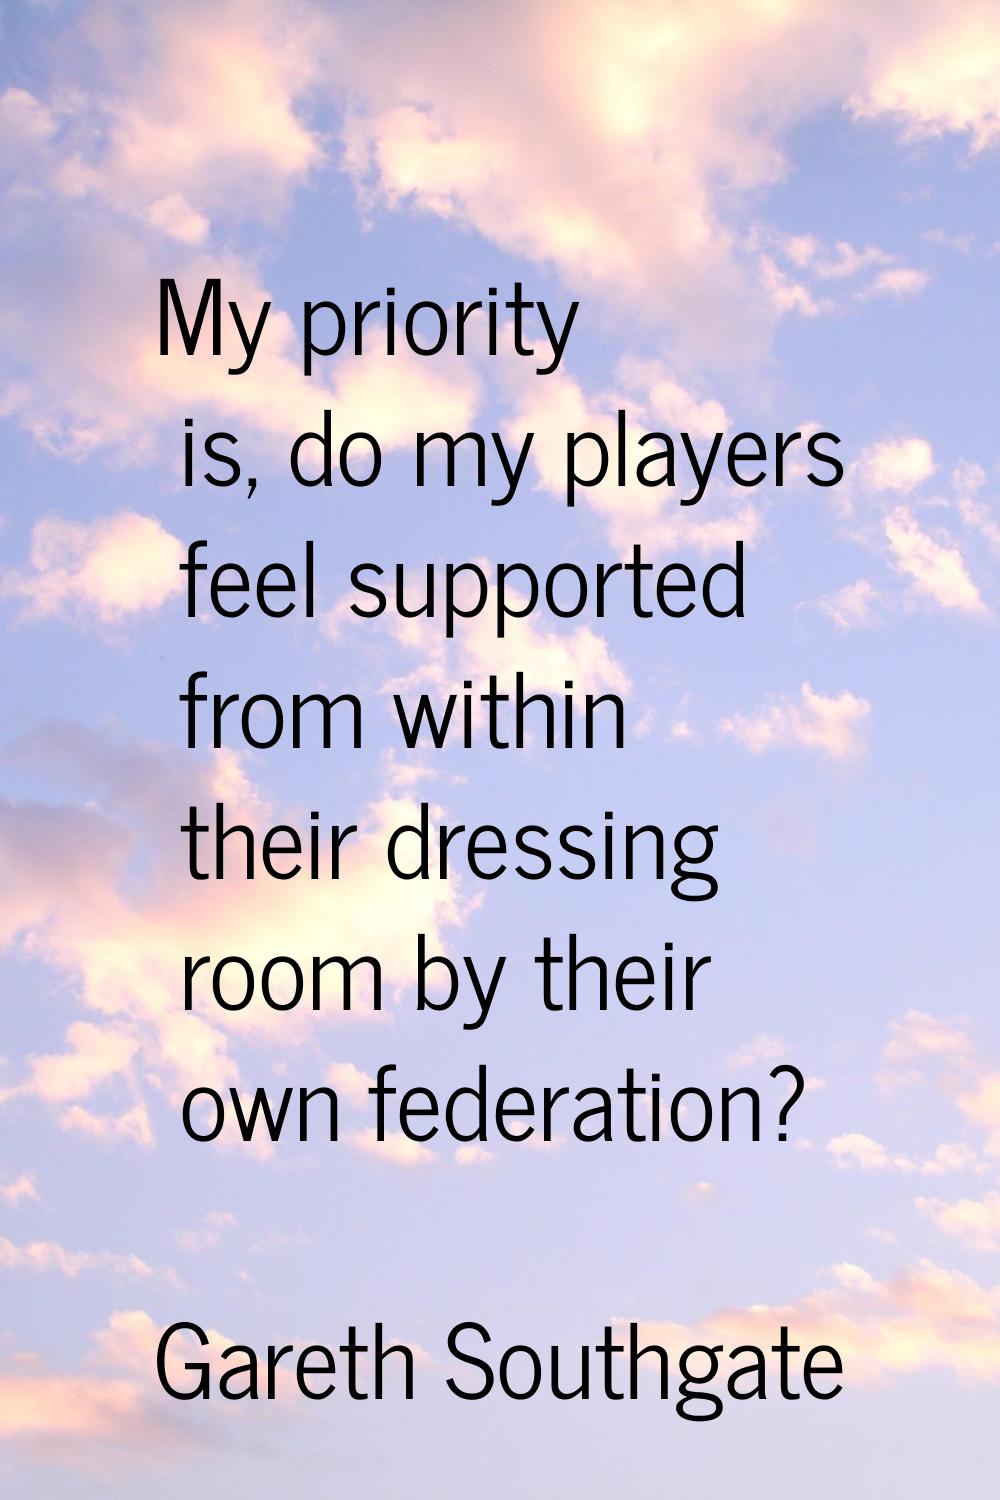 My priority is, do my players feel supported from within their dressing room by their own federatio